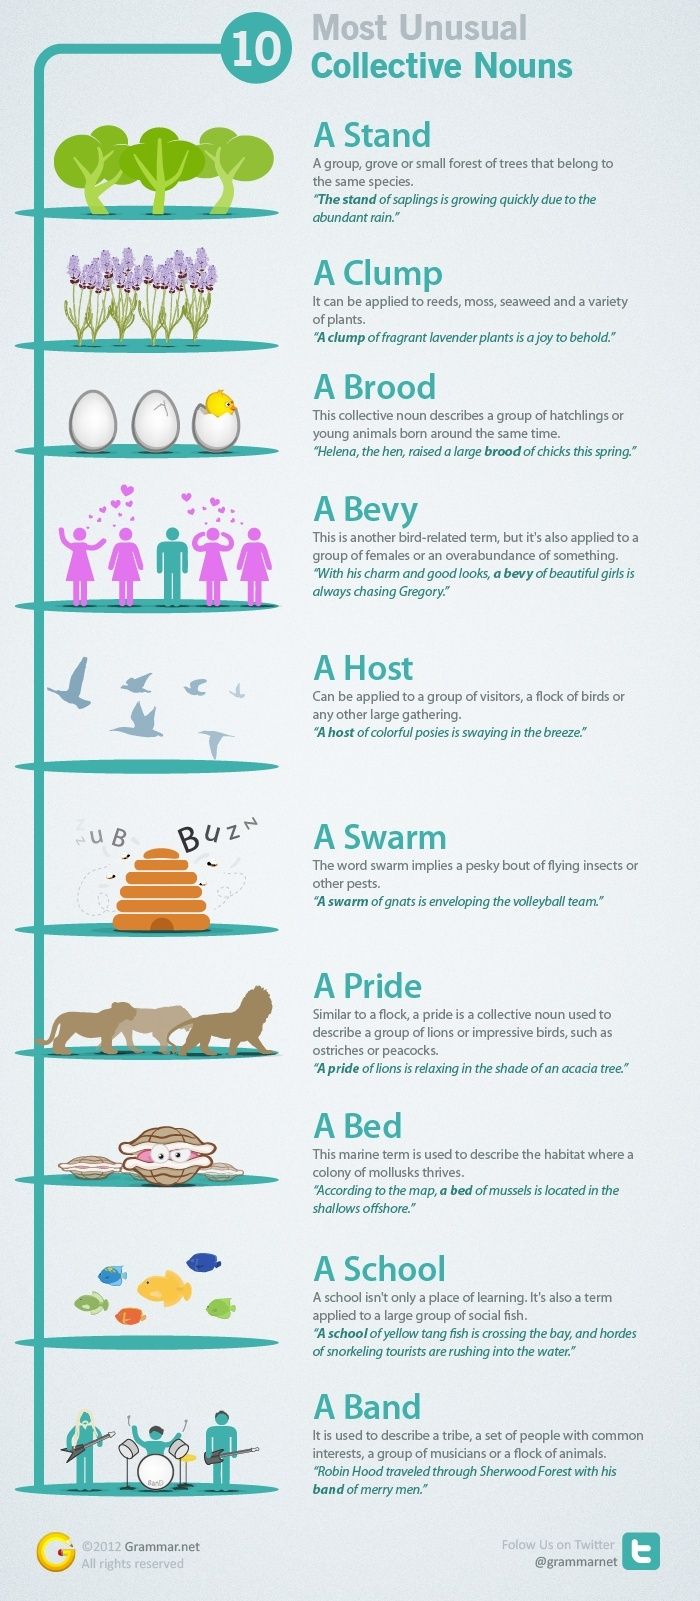 10 Most Unusual Collective Nouns Revealed and Explained 10-col10